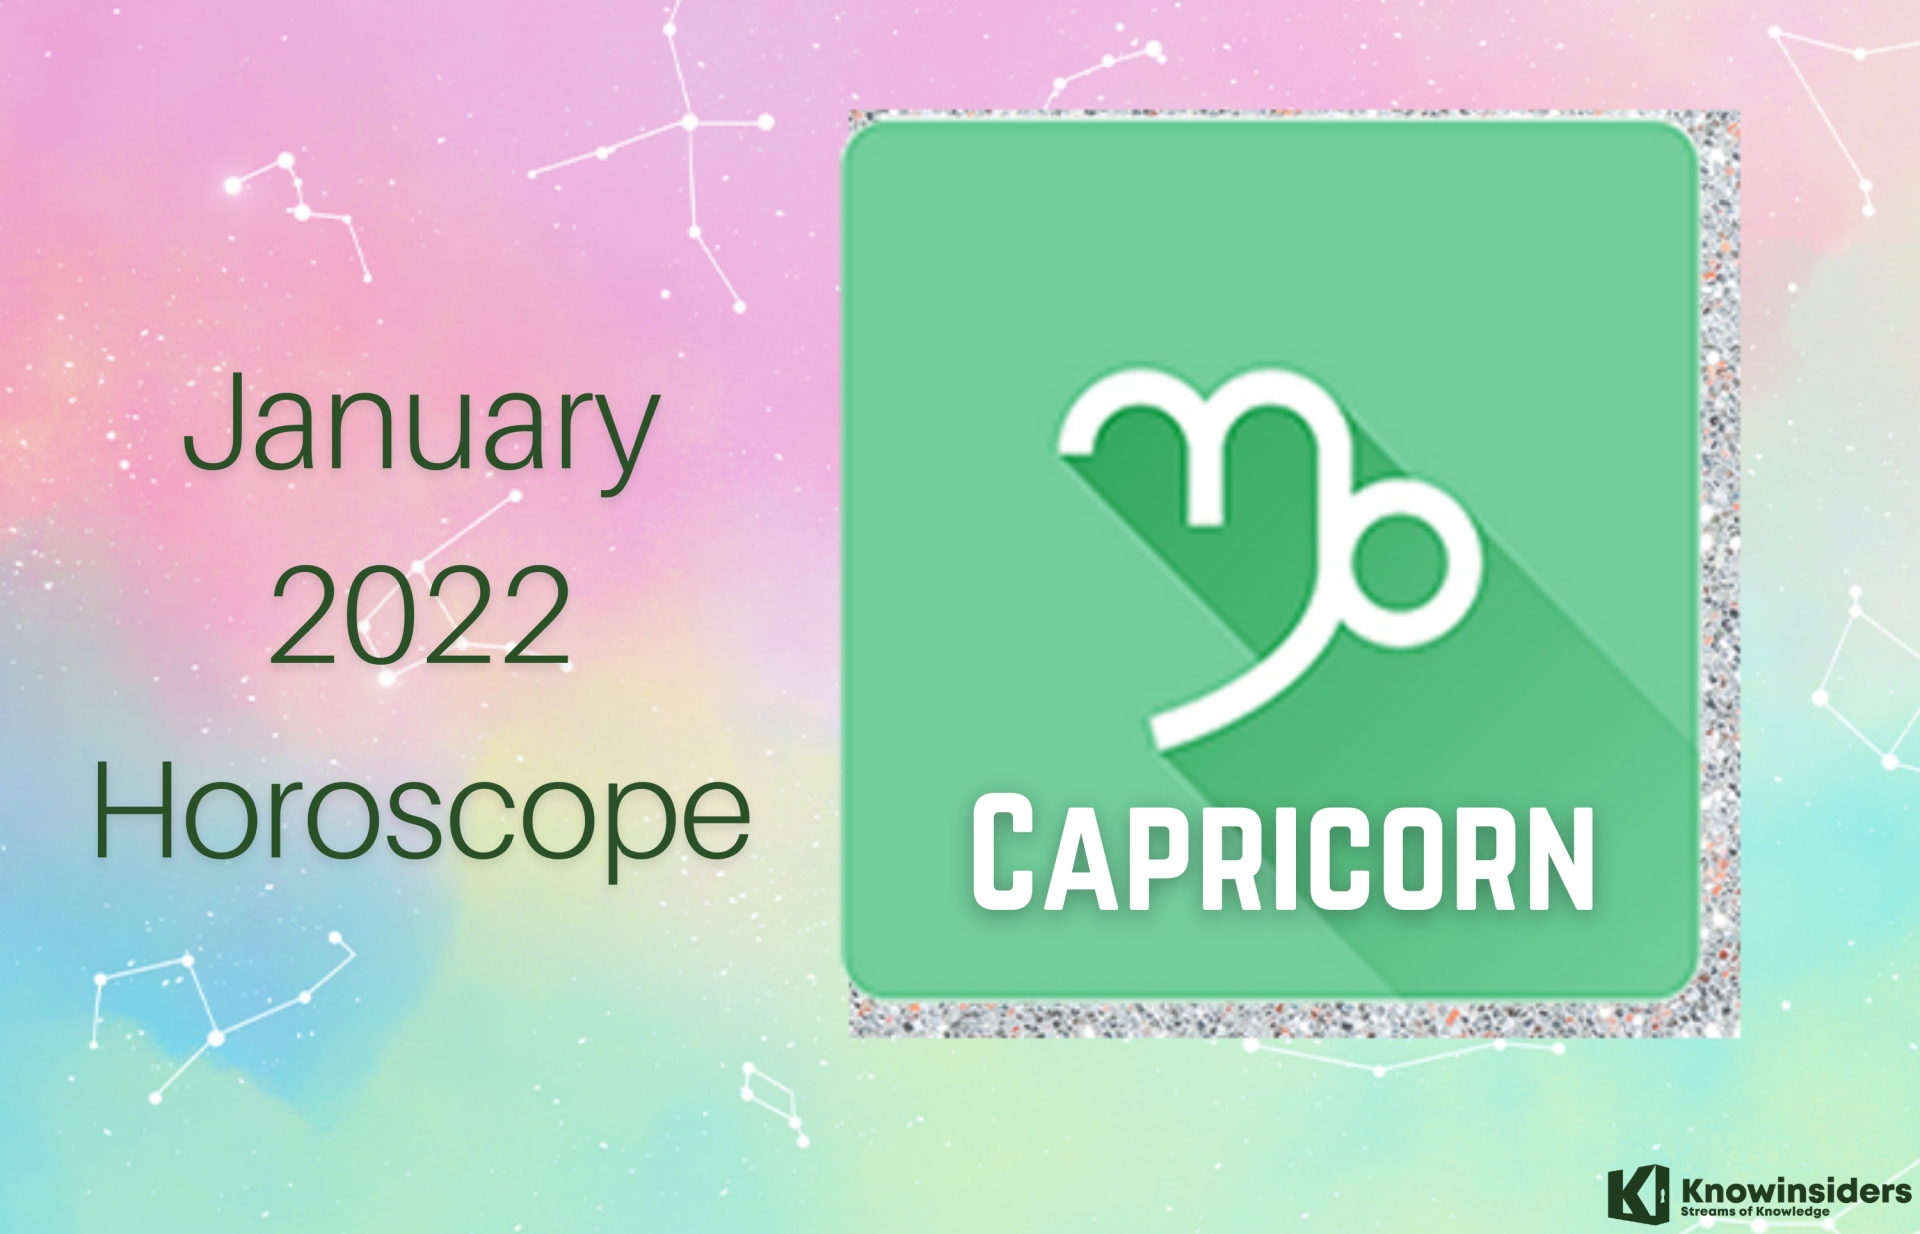 CAPRICORN January 2022 Horoscope: Monthly Prediction for Love, Career, Money and Health